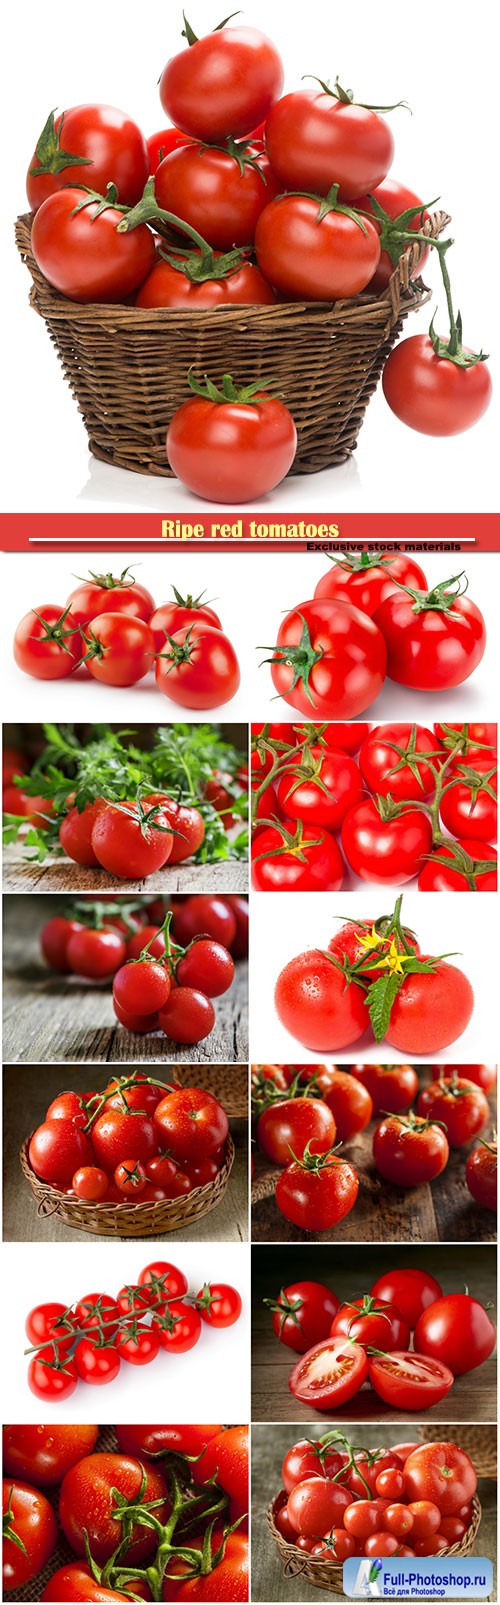 Ripe red tomatoes